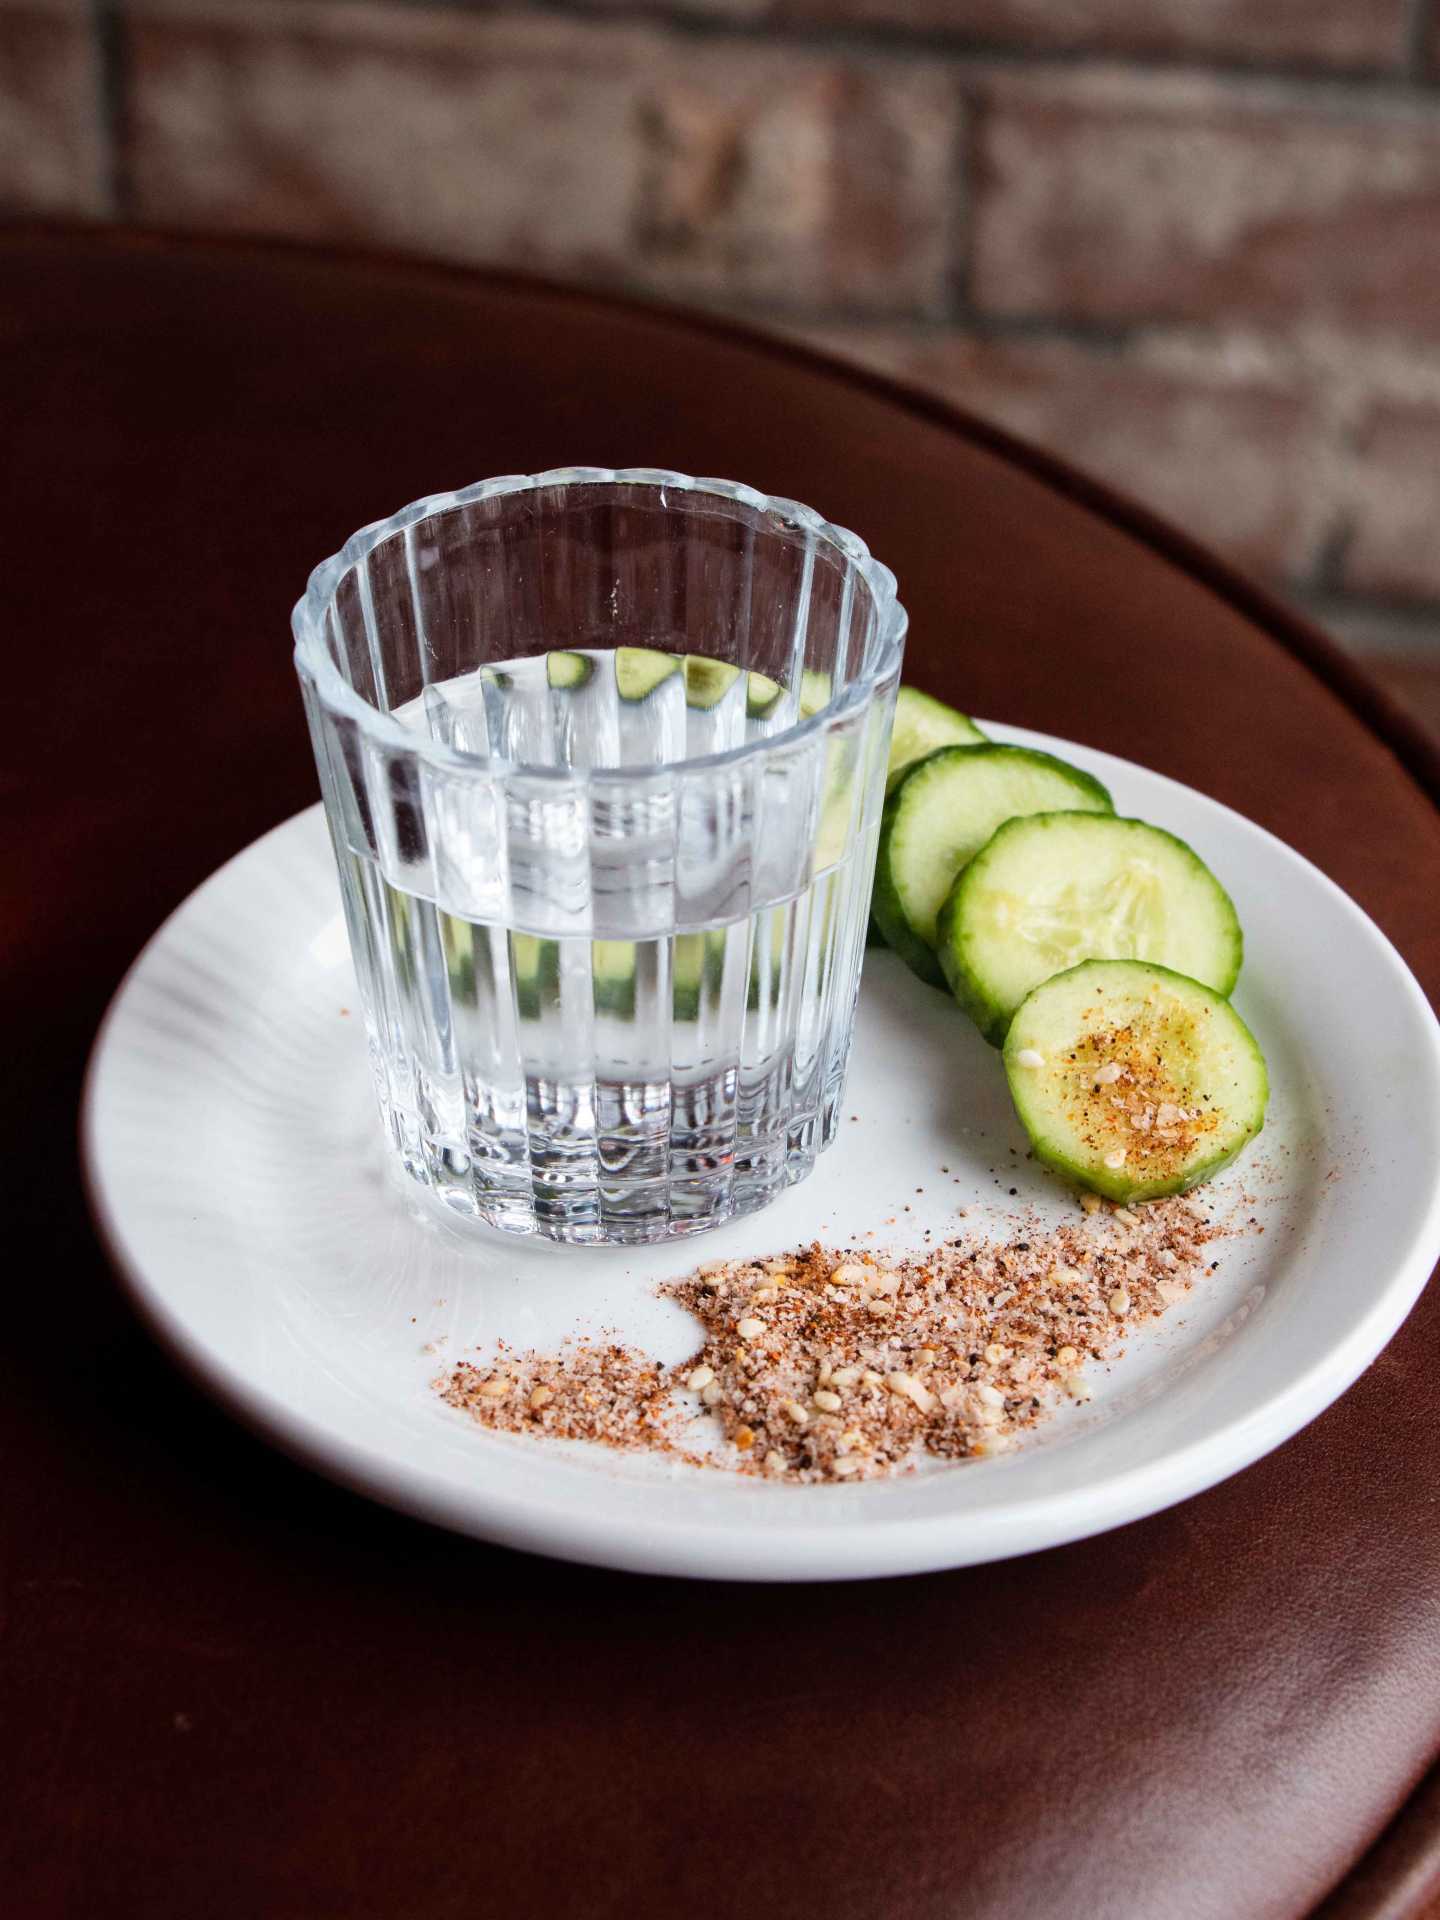 Tequila and mezcal | A glass of mezcal with cucumbers and rimming salt